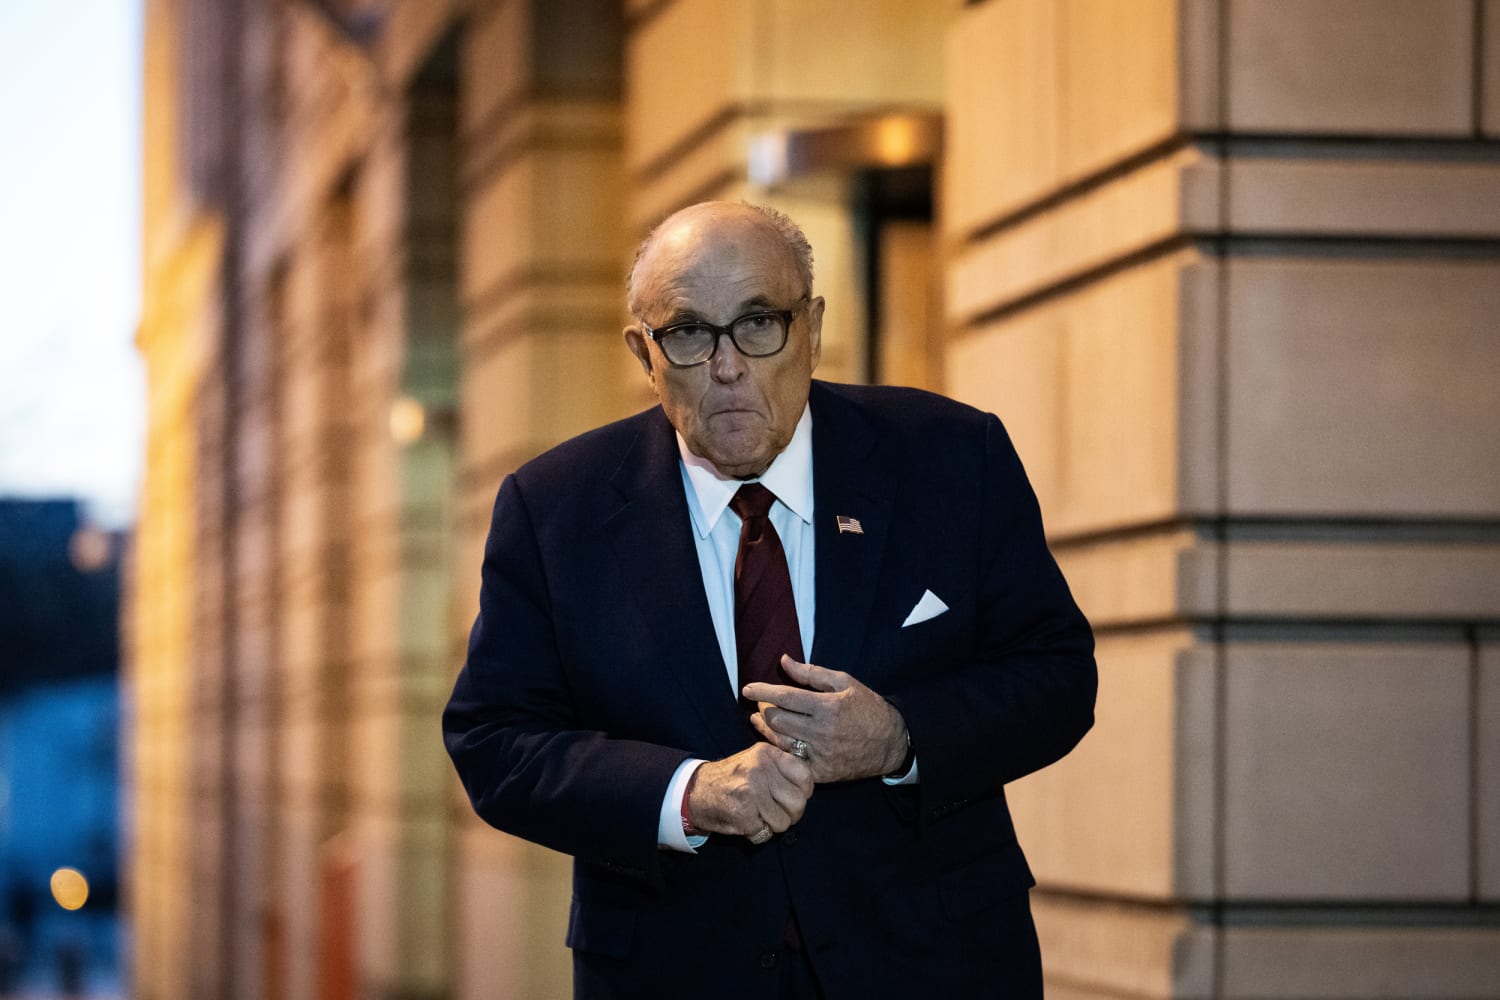 The election employee suing Rudy Giuliani testifies within the defamation trial towards him